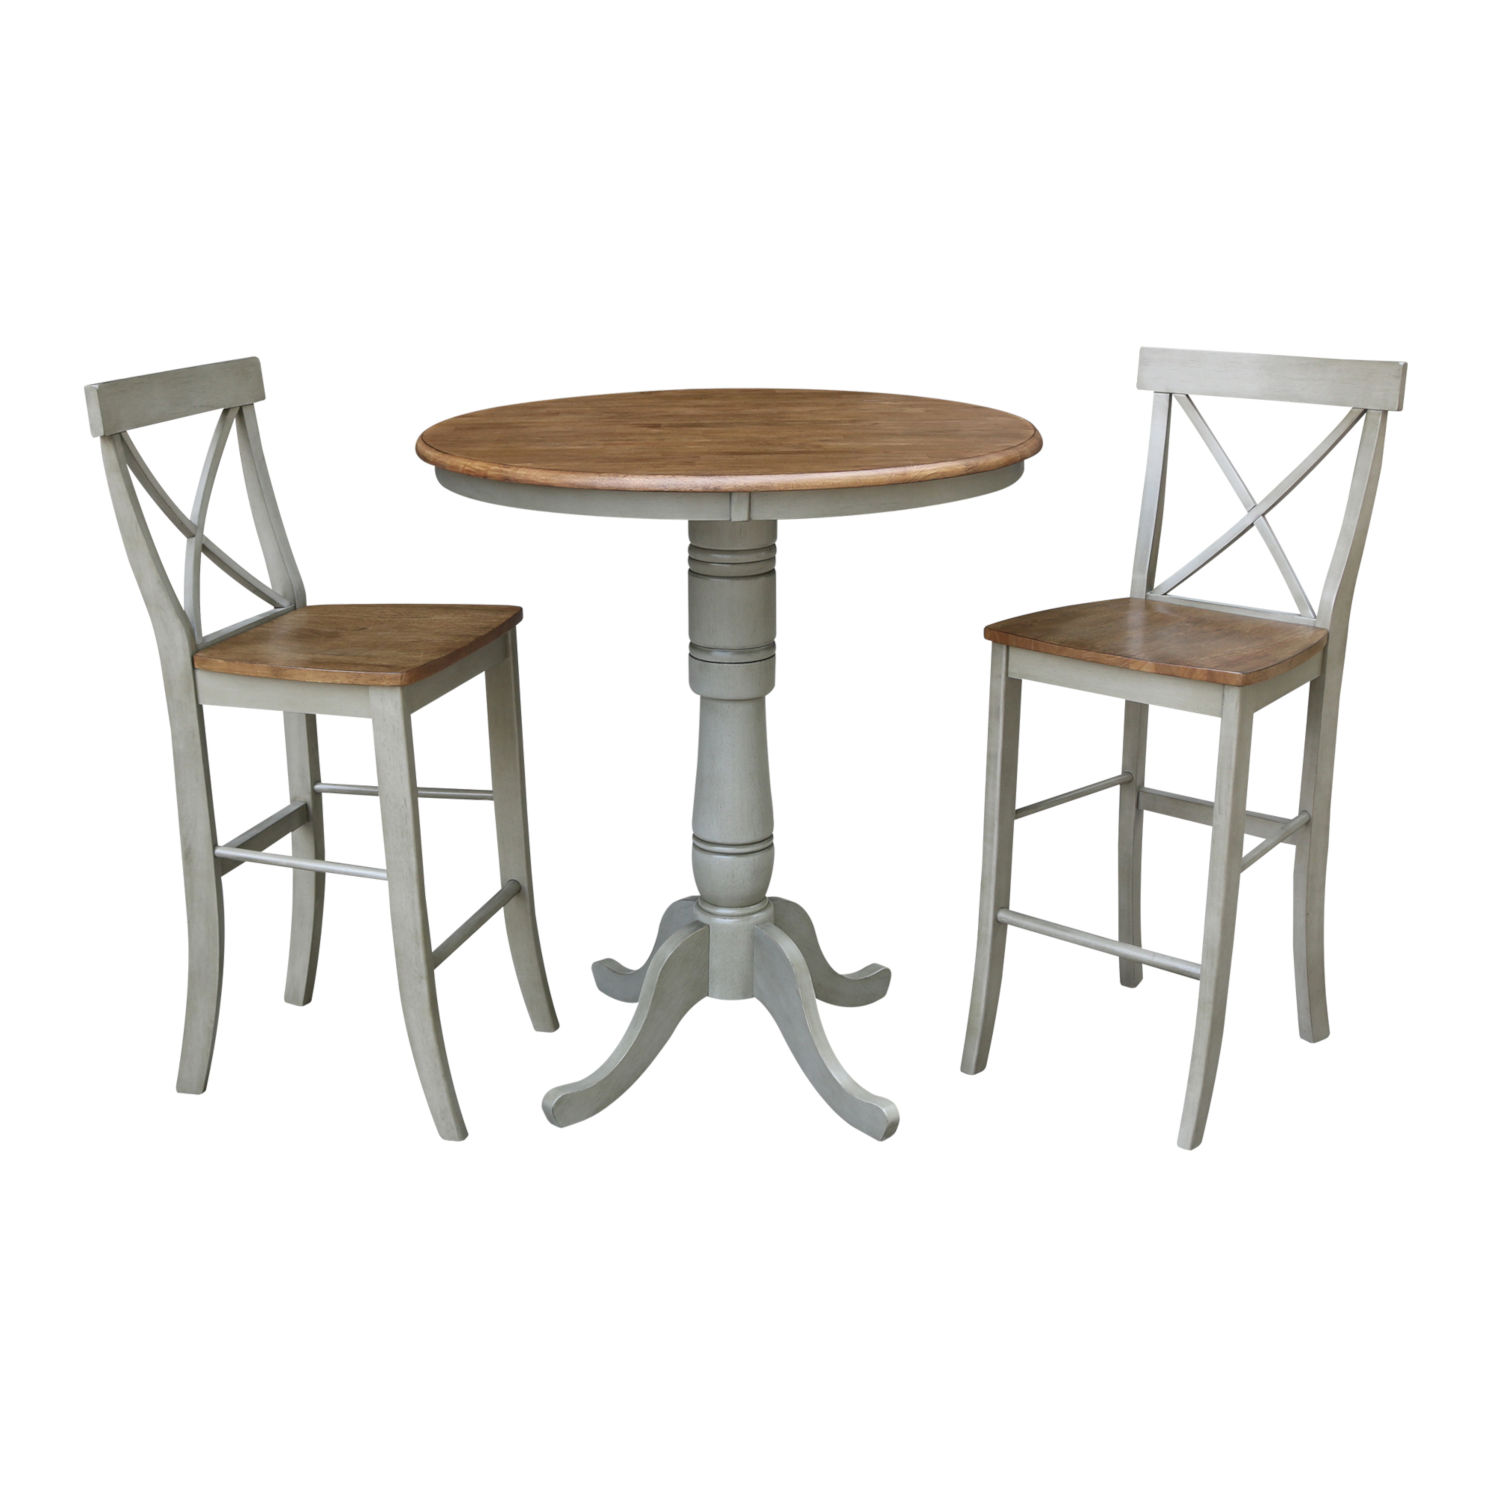 Hickory And Stone 36-Inch Round Pedestal Bar Height Table With Two X-Back Bar Height Stools, Three-Piece